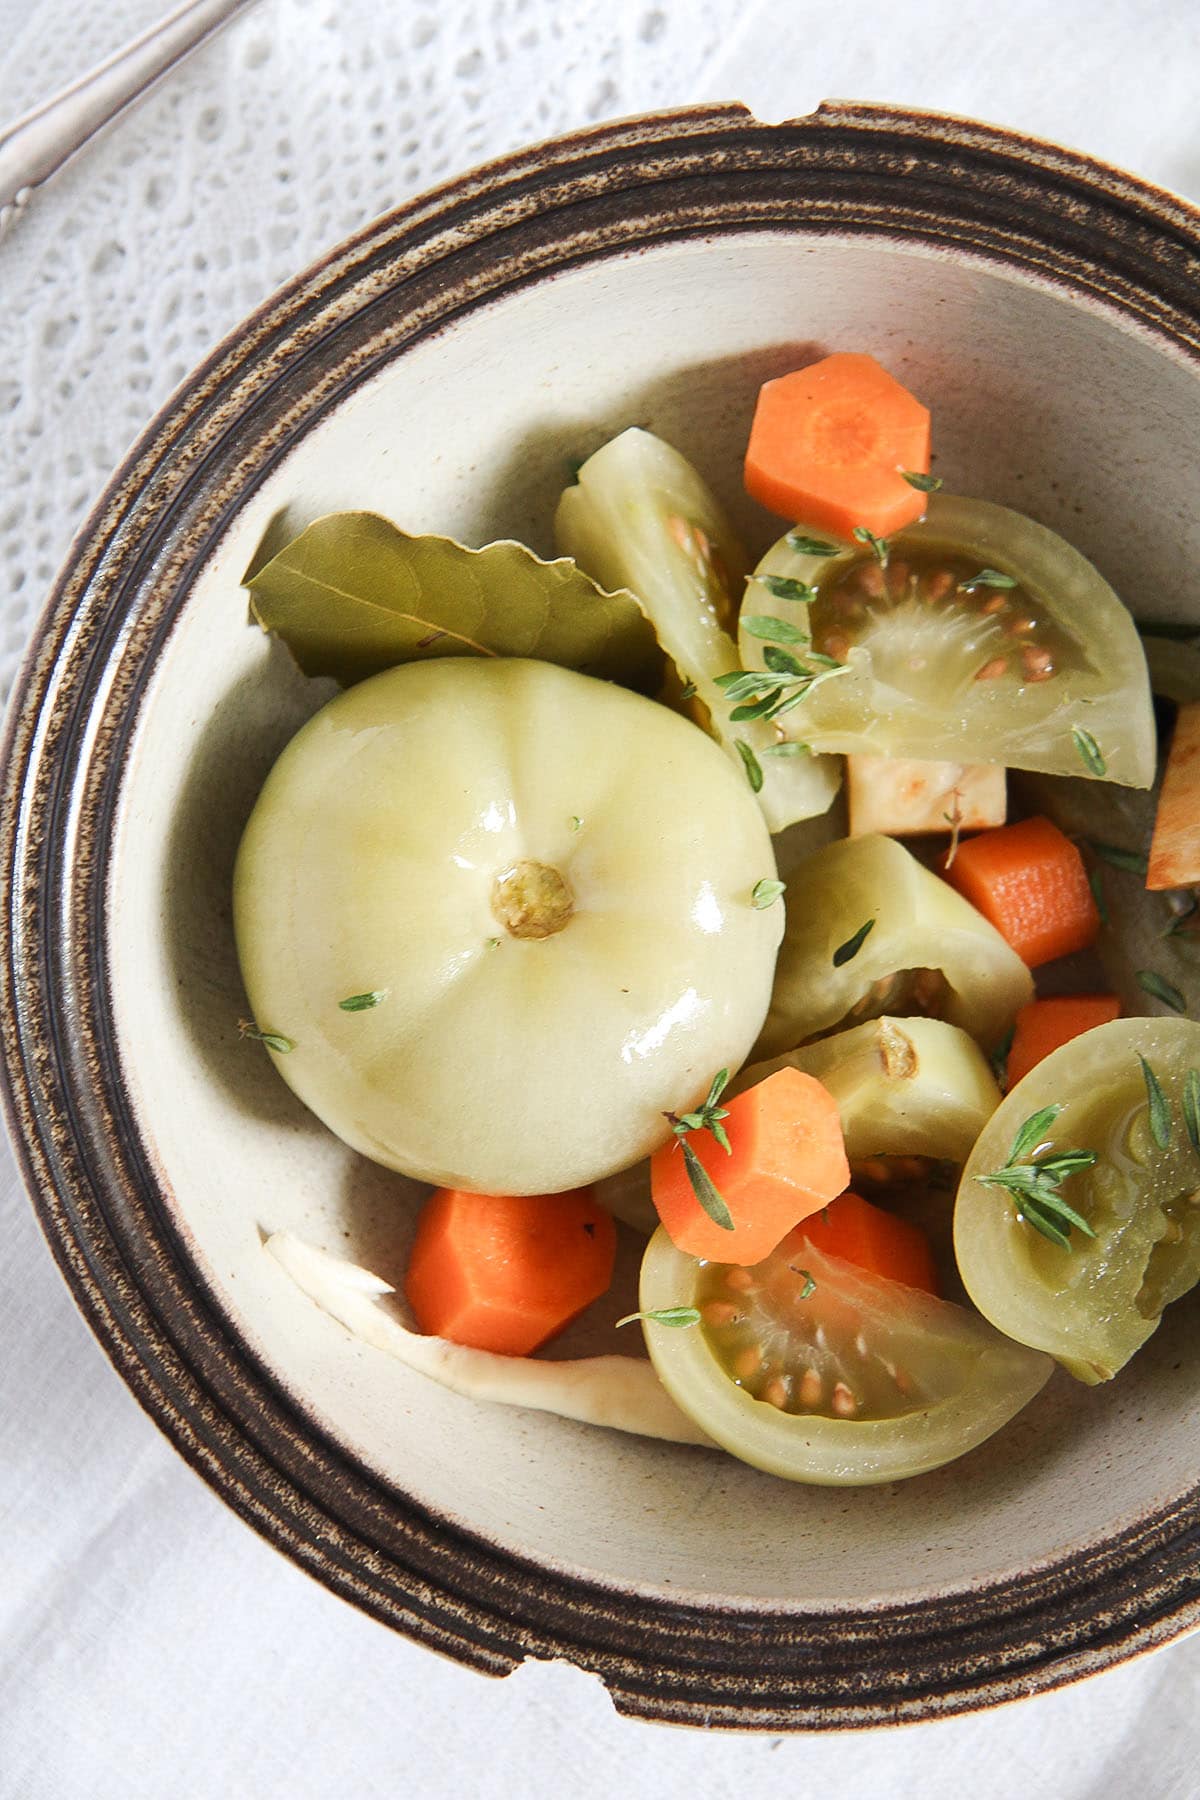 one whole pickled green tomato and another sliced one with carrots in a chipped bowl.